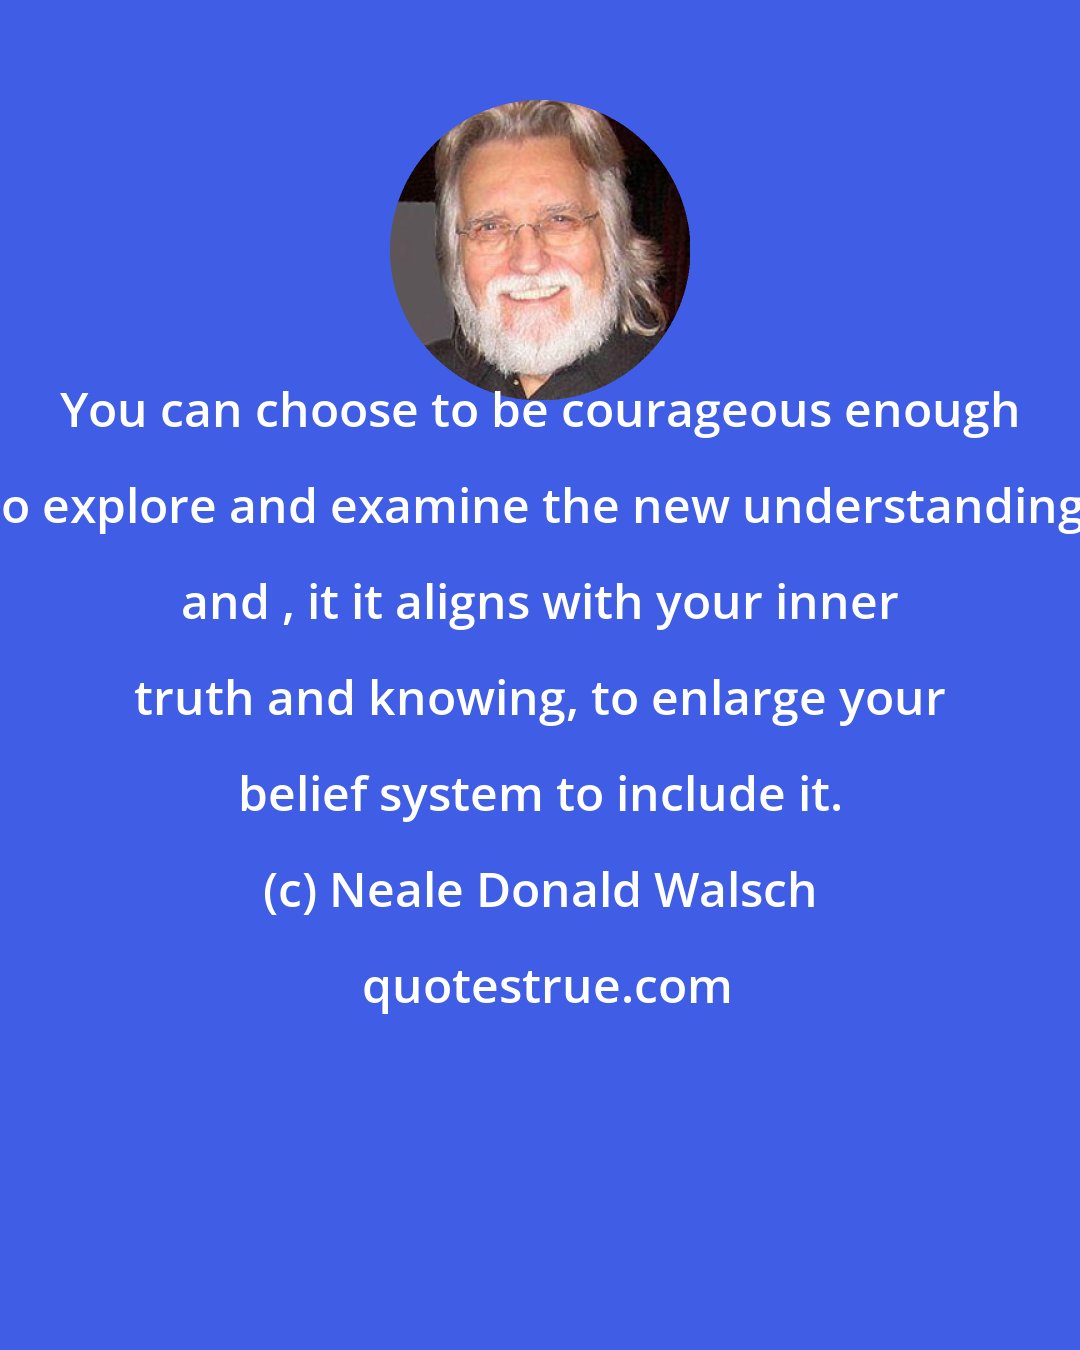 Neale Donald Walsch: You can choose to be courageous enough to explore and examine the new understanding, and , it it aligns with your inner truth and knowing, to enlarge your belief system to include it.